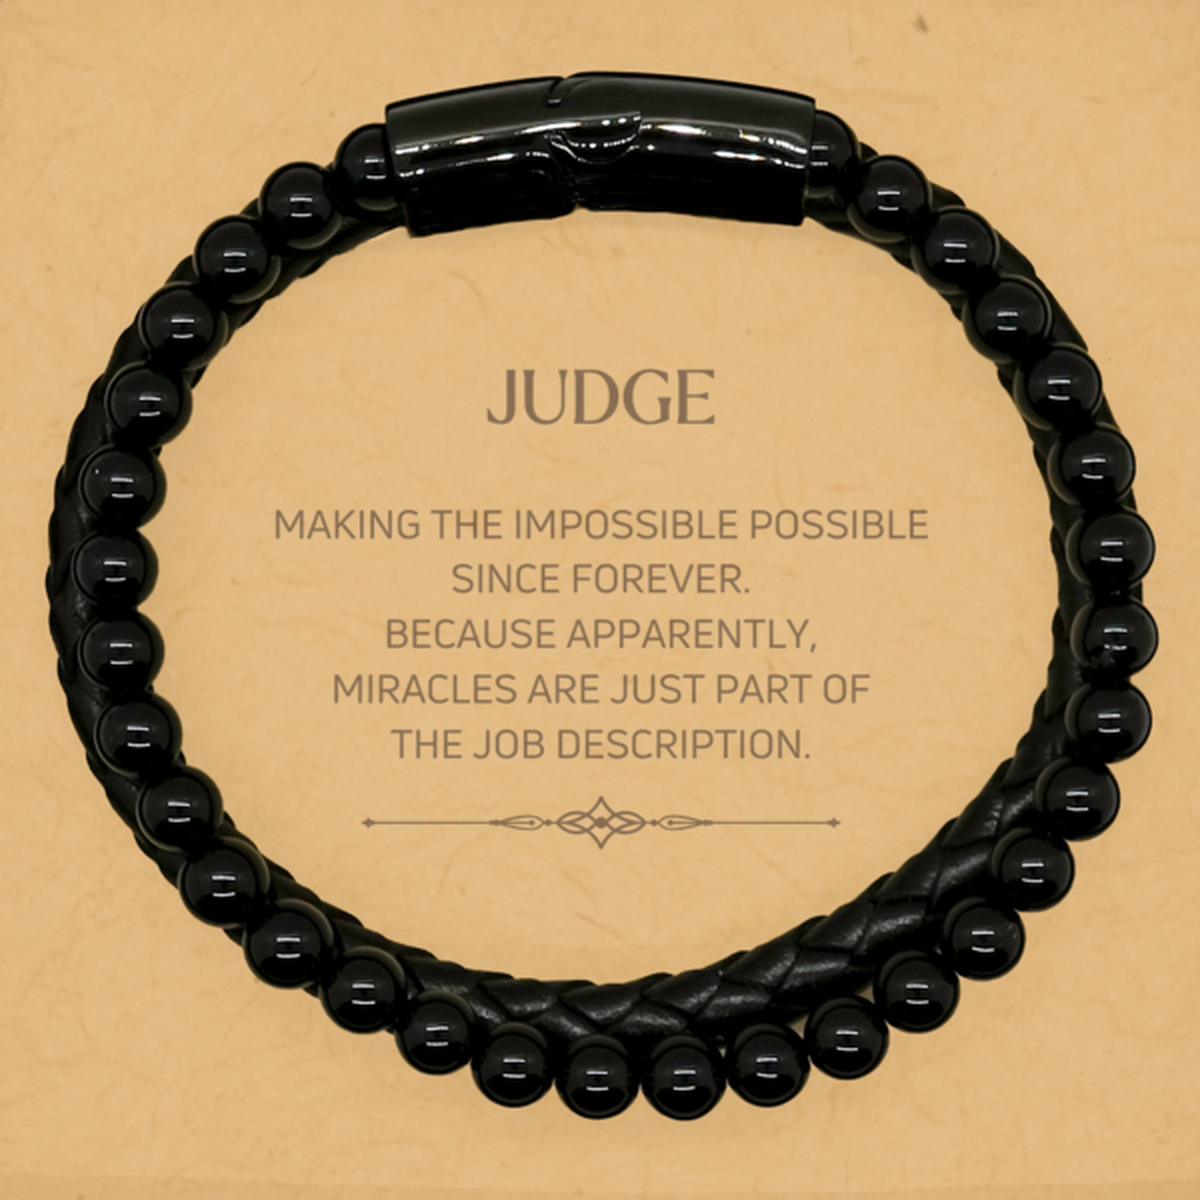 Funny Judge Gifts, Miracles are just part of the job description, Inspirational Birthday Stone Leather Bracelets For Judge, Men, Women, Coworkers, Friends, Boss